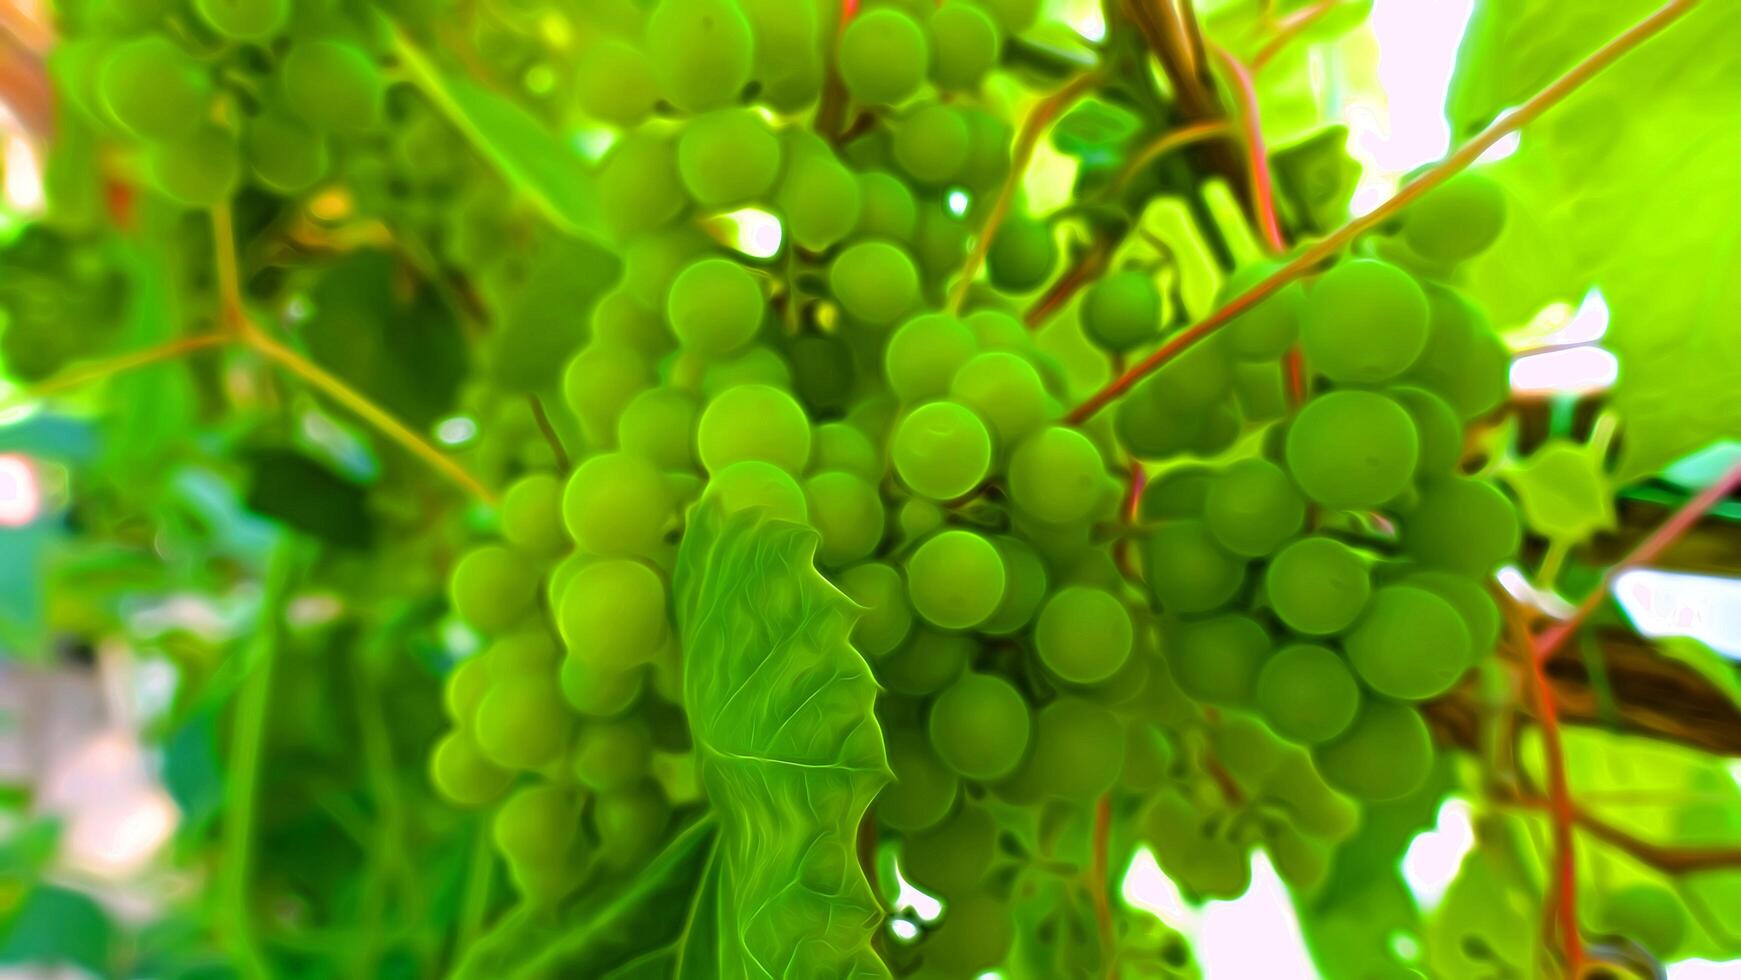 Digital painting style that represents unripe bunches of grapes immersed in the leaves photo